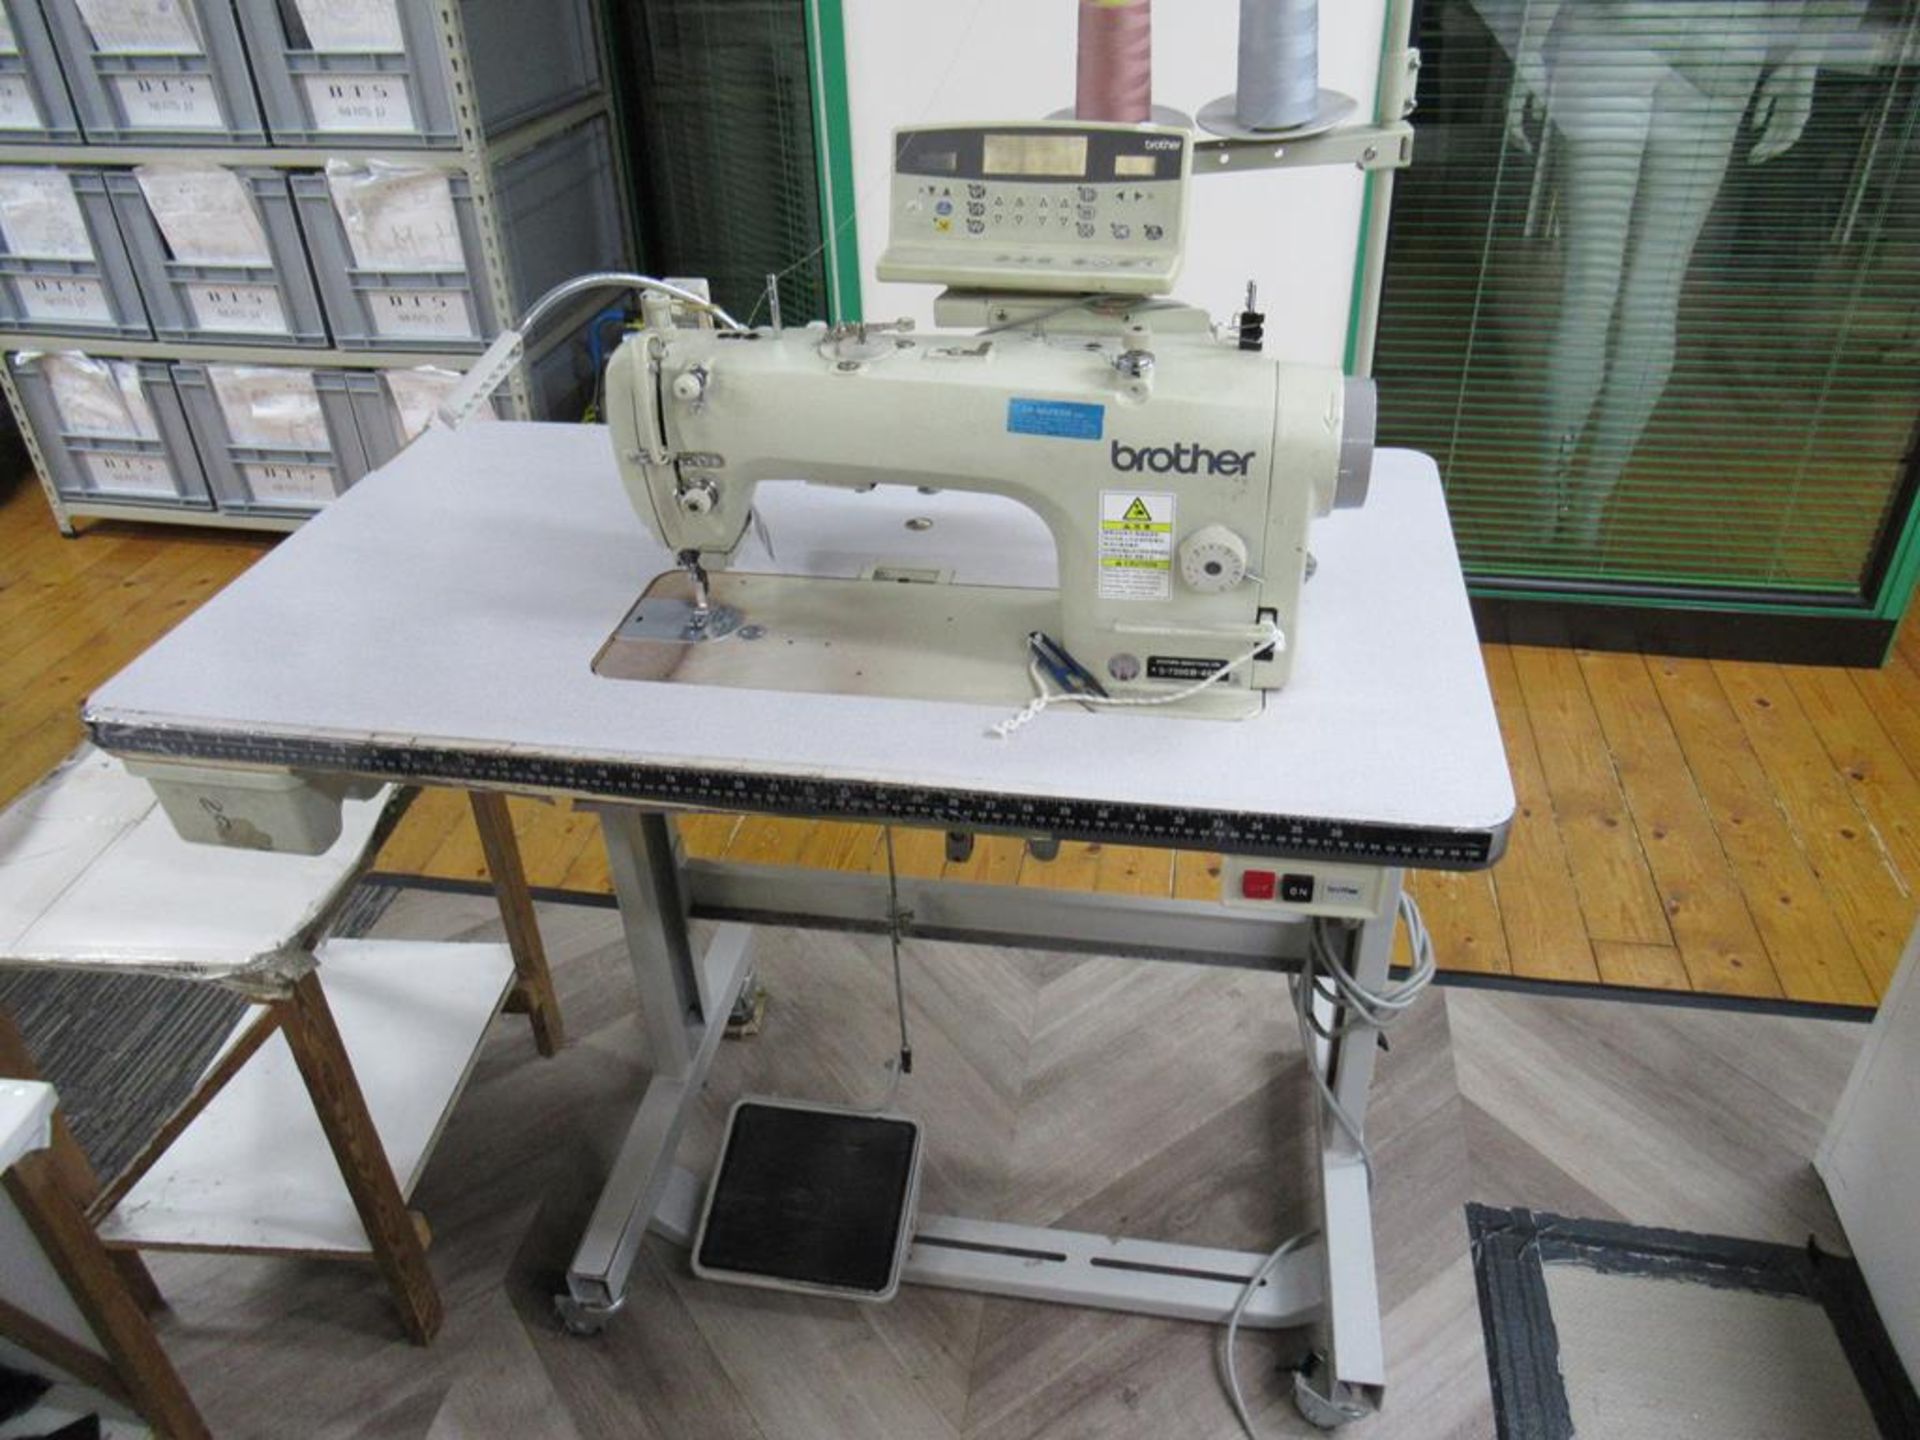 A Brother S-7200B- 403 Single Needle Direct Drive Straight Stitch Sewing Machine with Electronic Fee